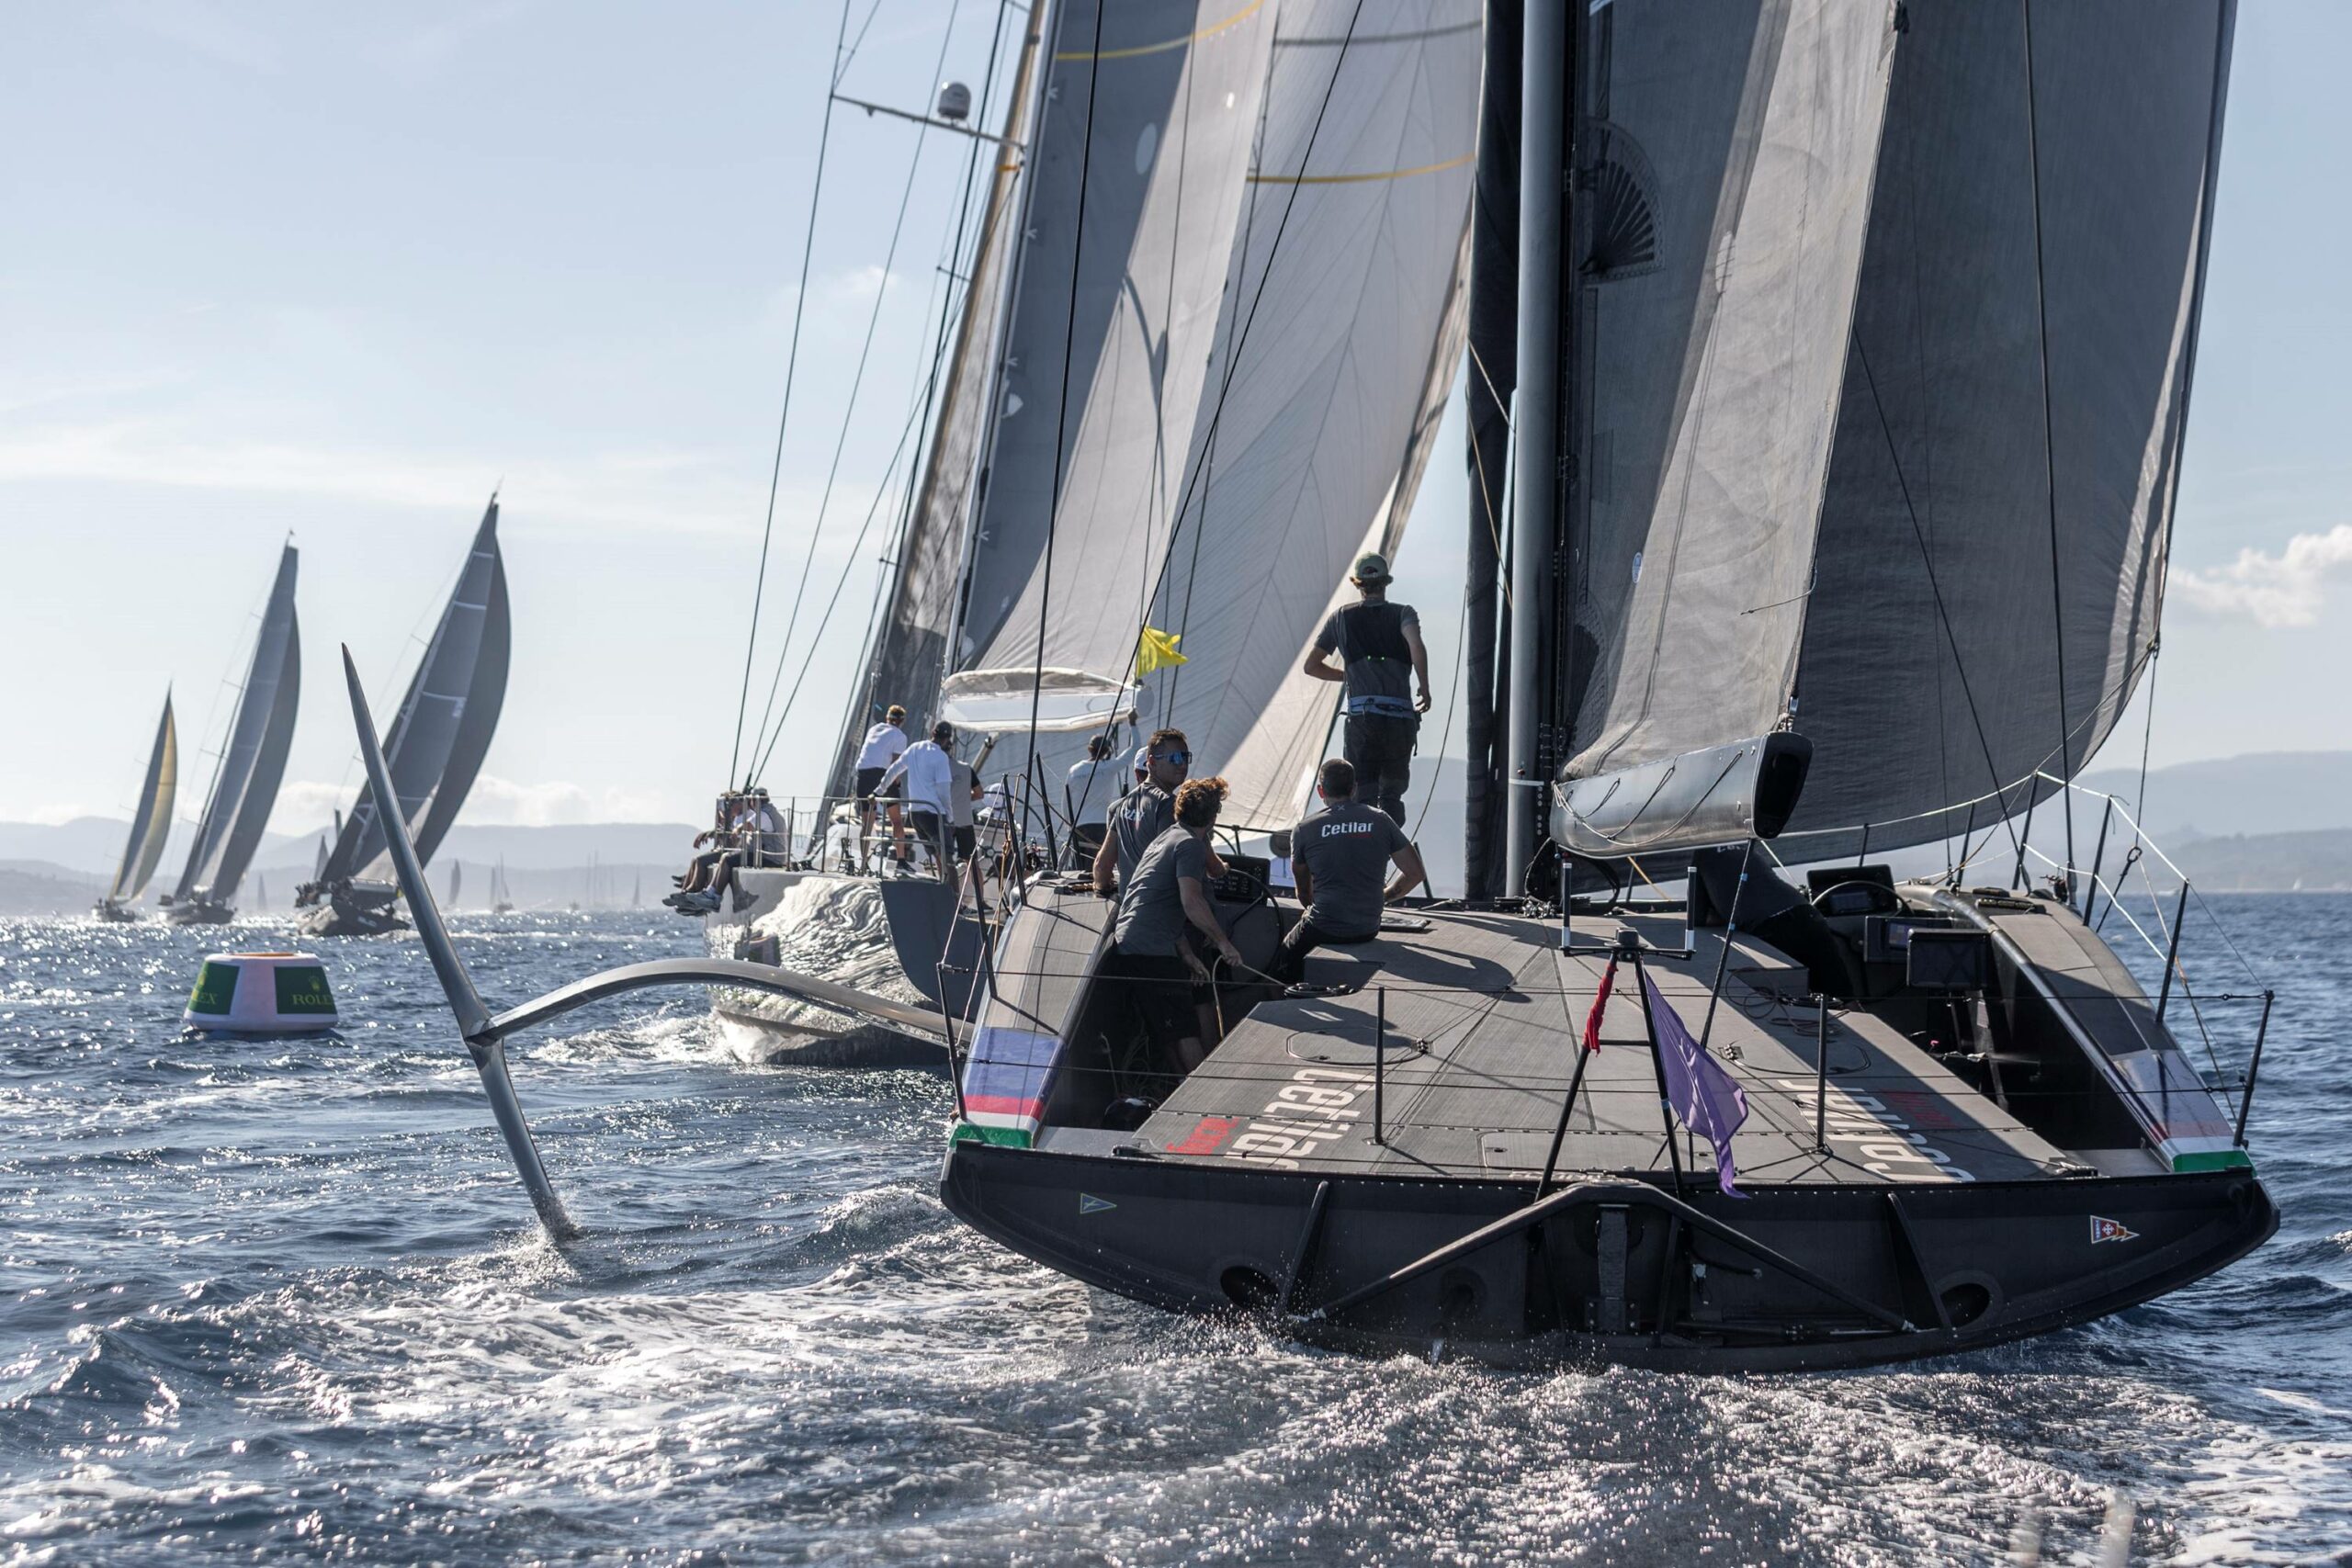 The curtain closes on an absolutely spellbinding Voiles de Saint-Tropez 2022!